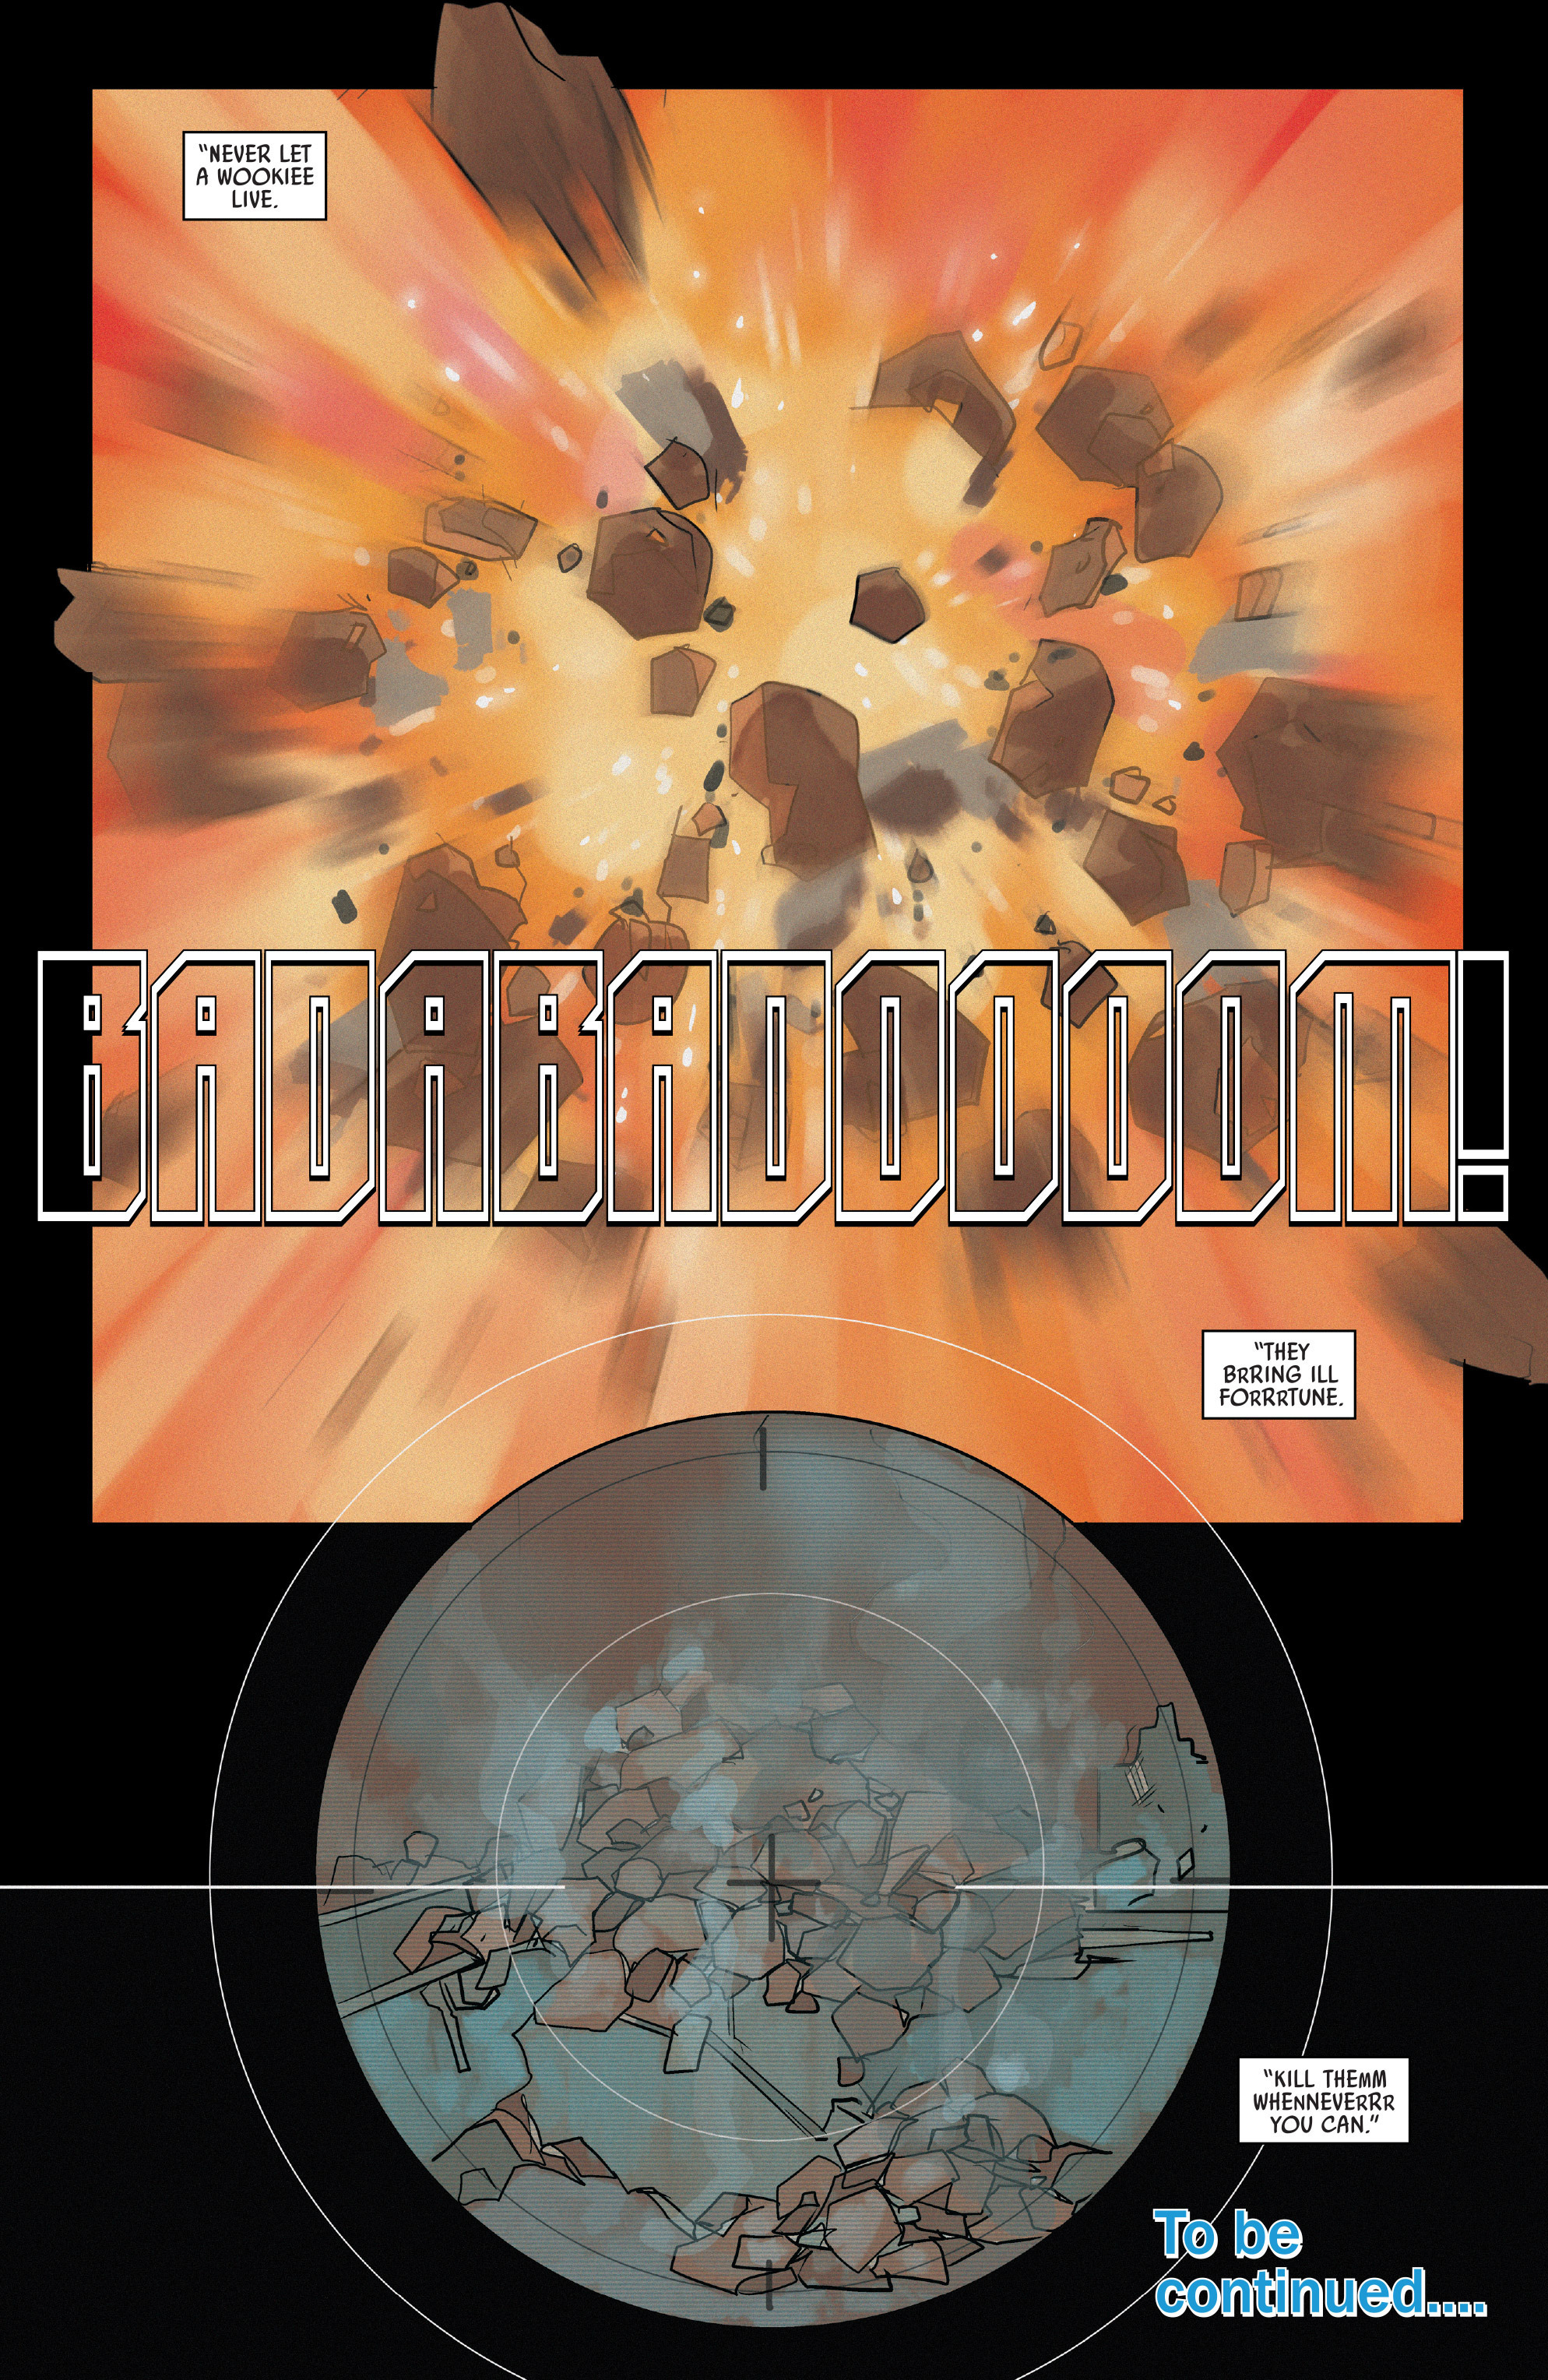 Read online Chewbacca comic -  Issue #2 - 22